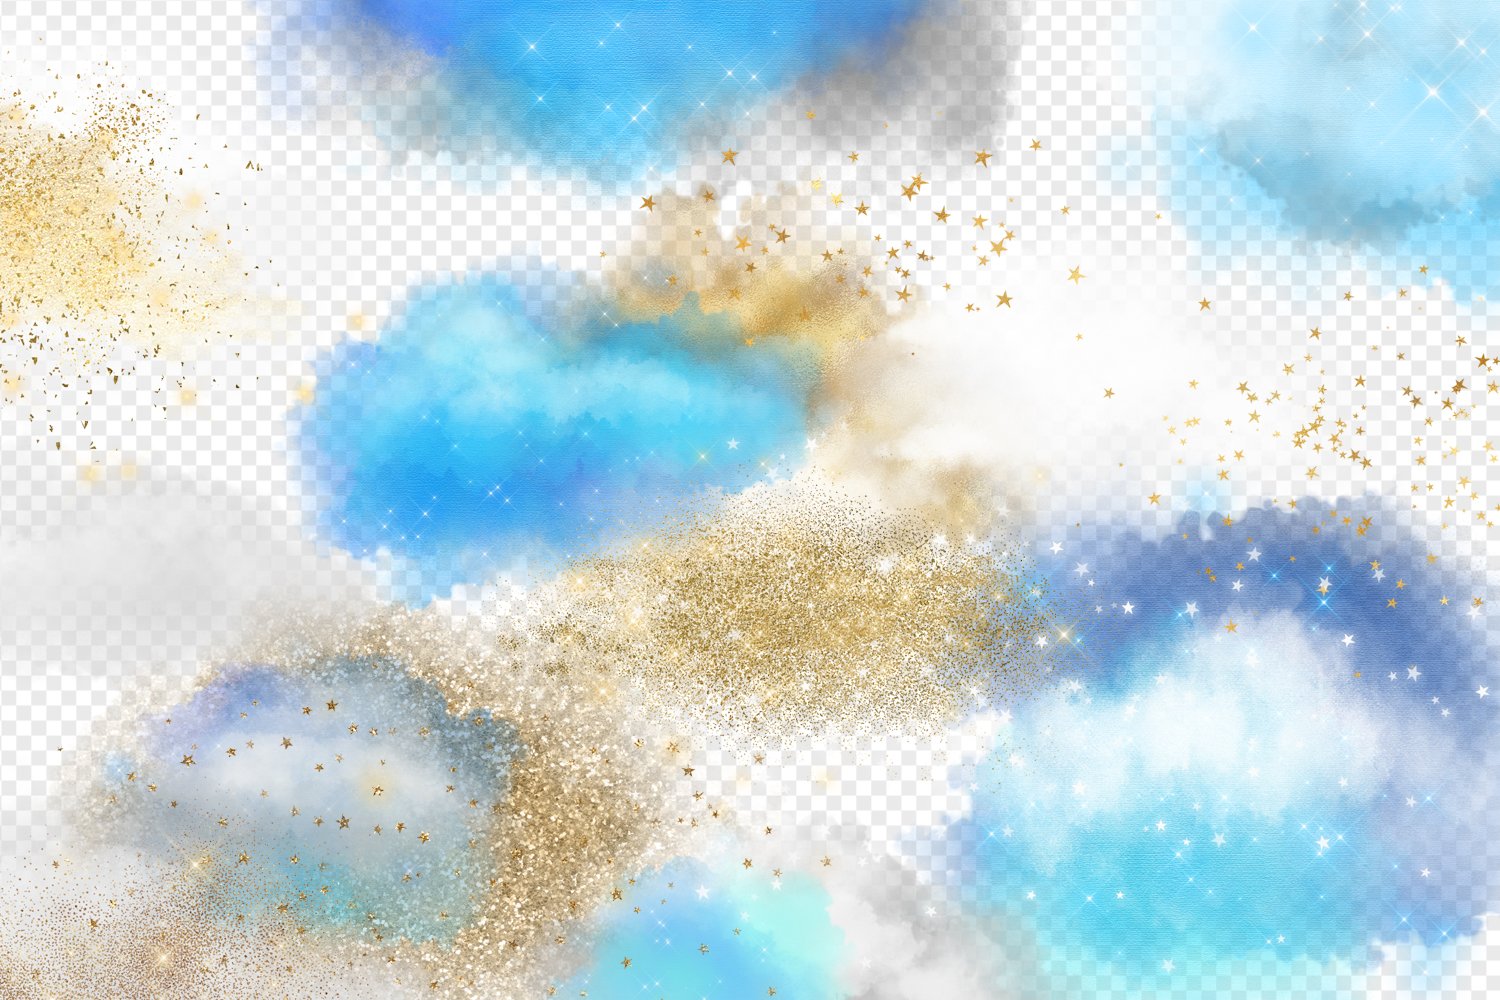 Clouds & Stars Overlays preview image.